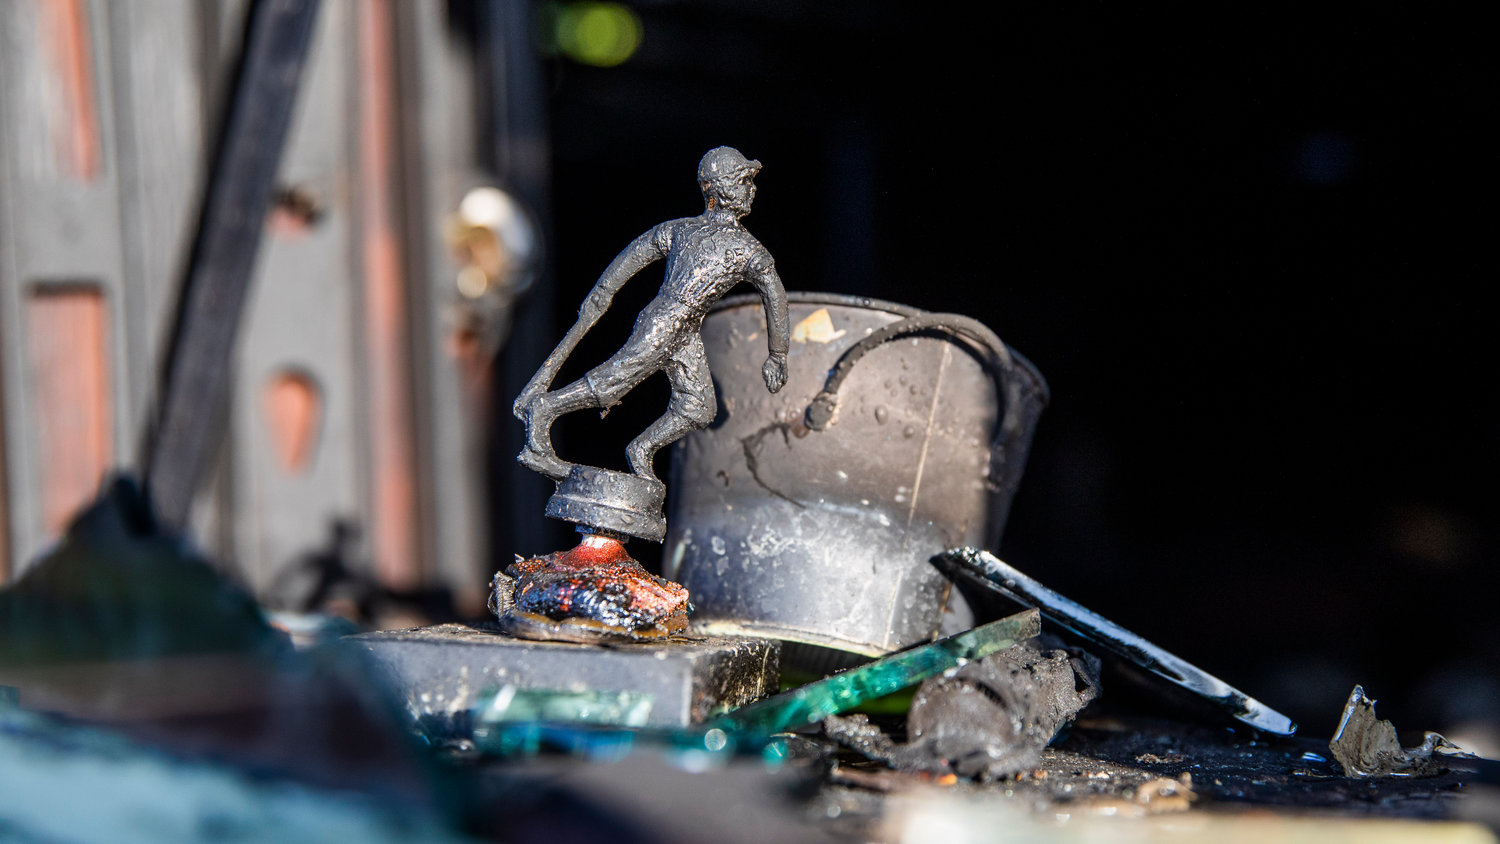 Melted trophies are seen at a structure fire along View Avenue in Centralia where a detached garage and items inside were damaged by flames Wednesday morning.